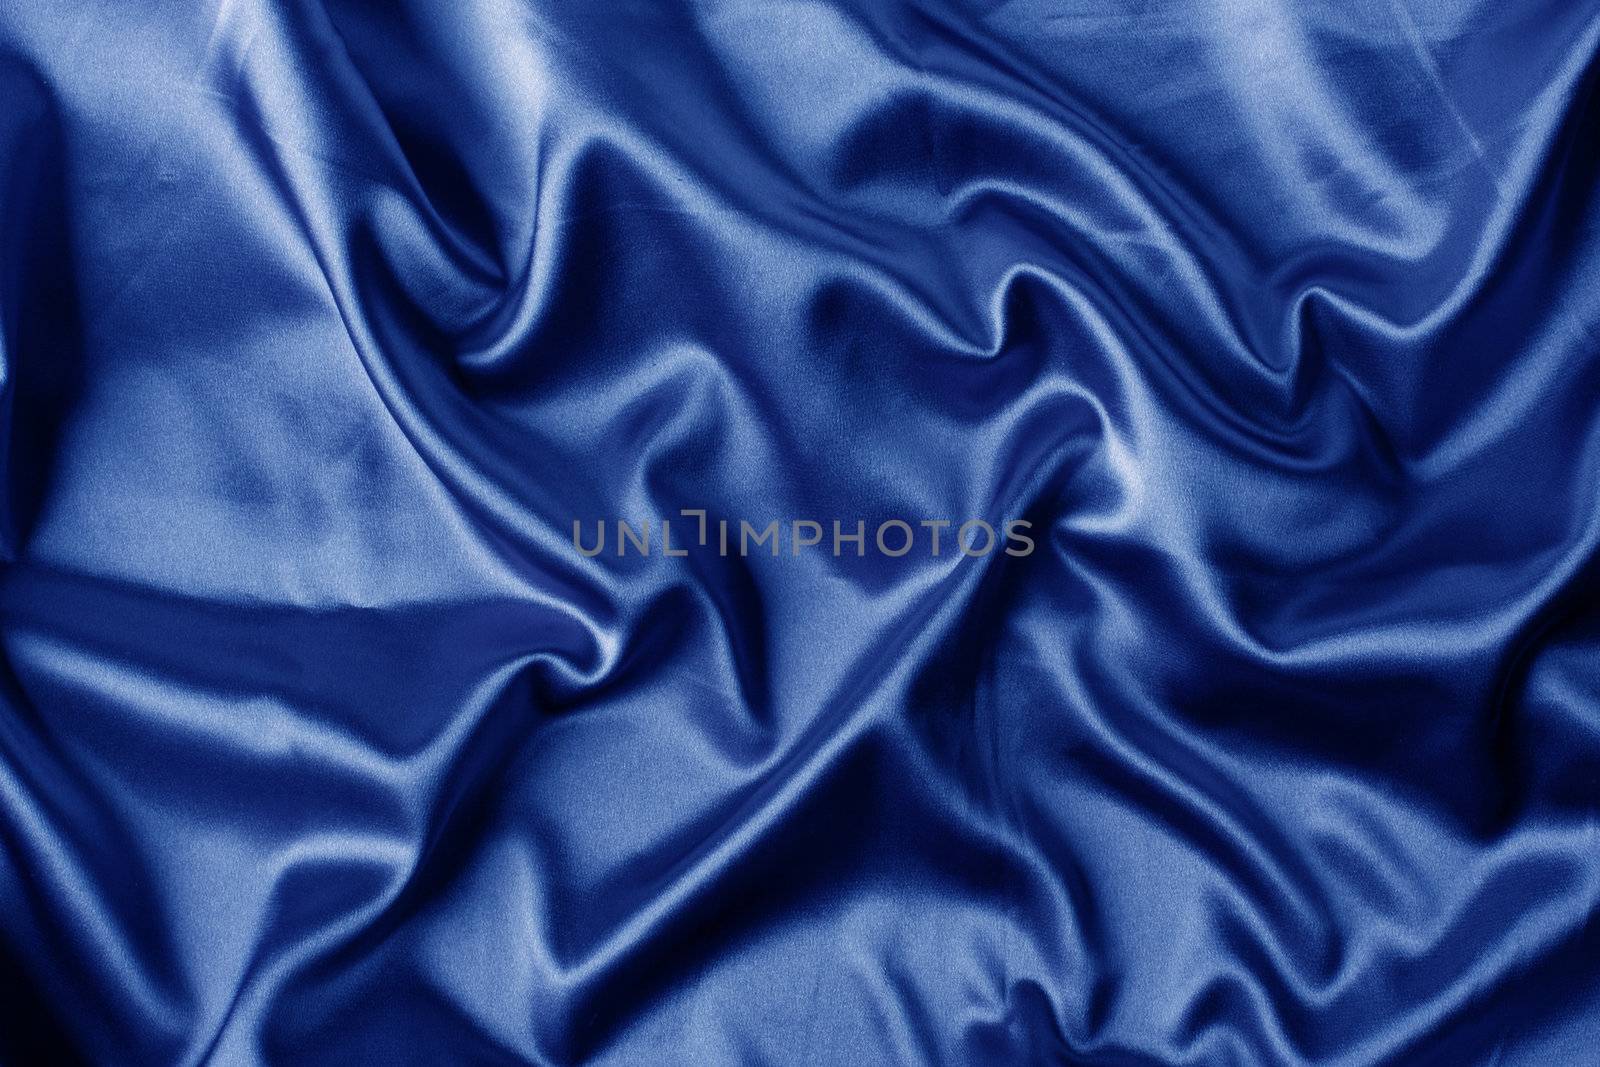 Luscious blue satin, curvy and soft looking, fantastic for backgrounds